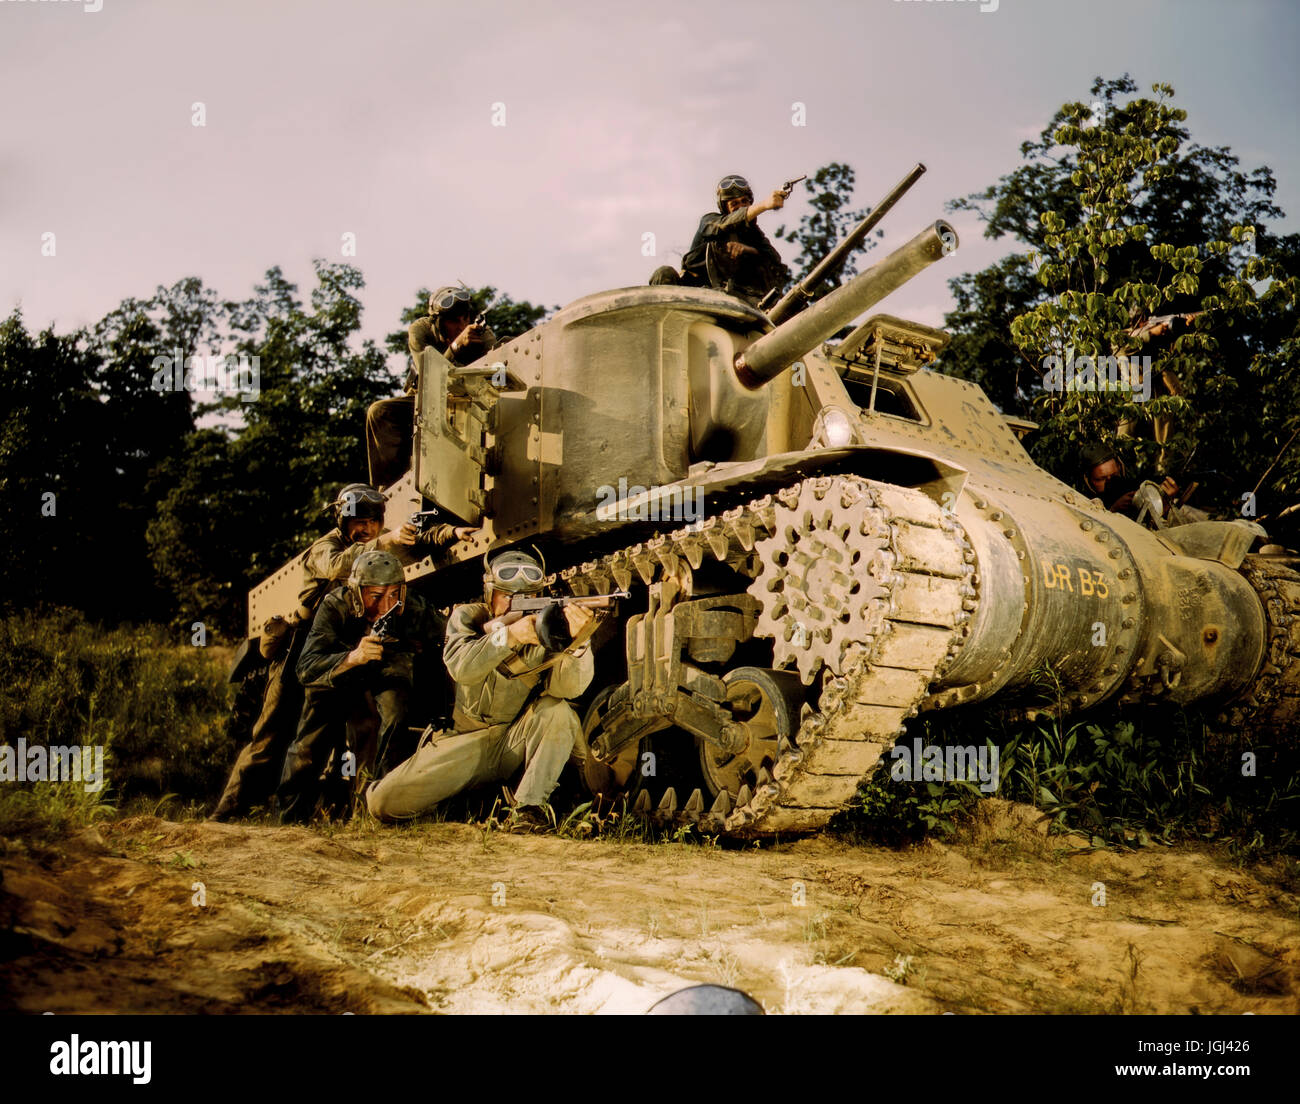 M-3 tank and crew using small arms, Ft. Knox, Ky.  Palmer, Alfred T., photographer.  CREATED/PUBLISHED 1942 June Stock Photo